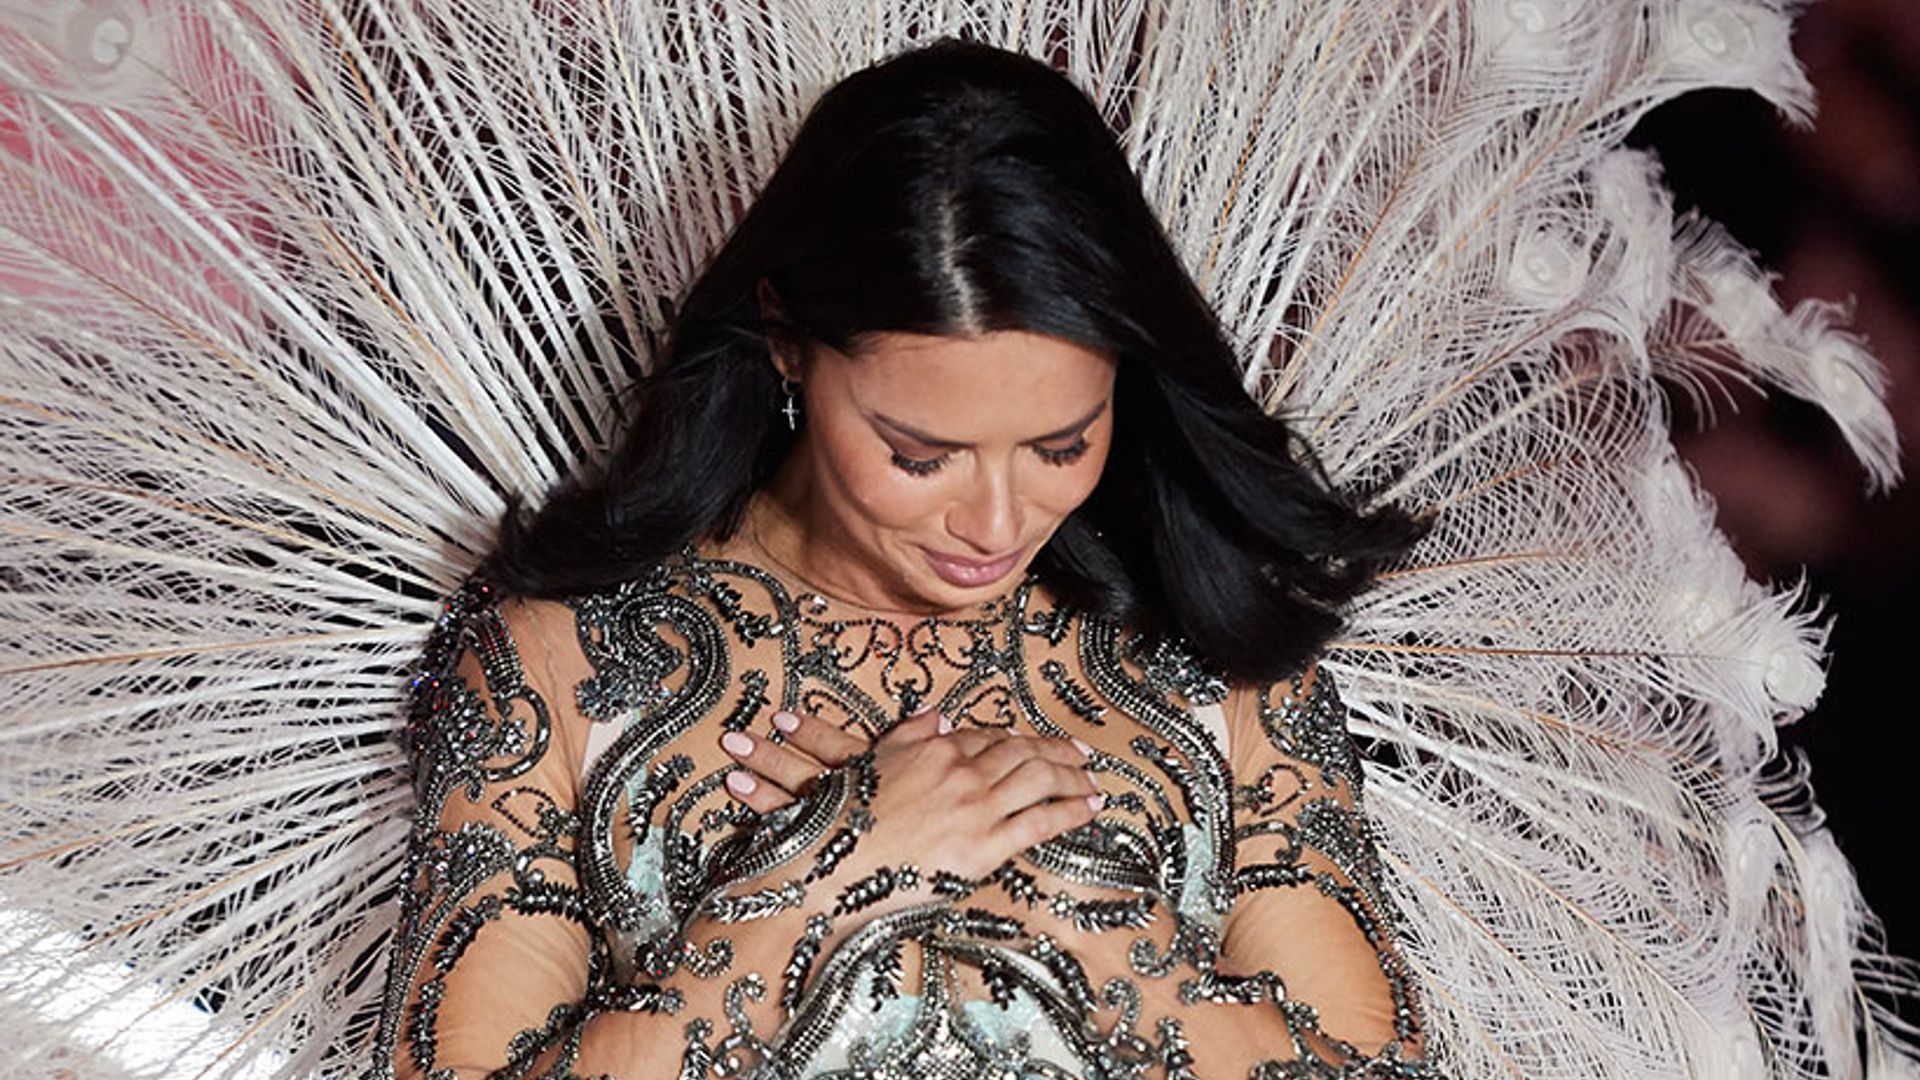 See Adriana Lima's epic final walk for Victoria's Secret as she retires her wings